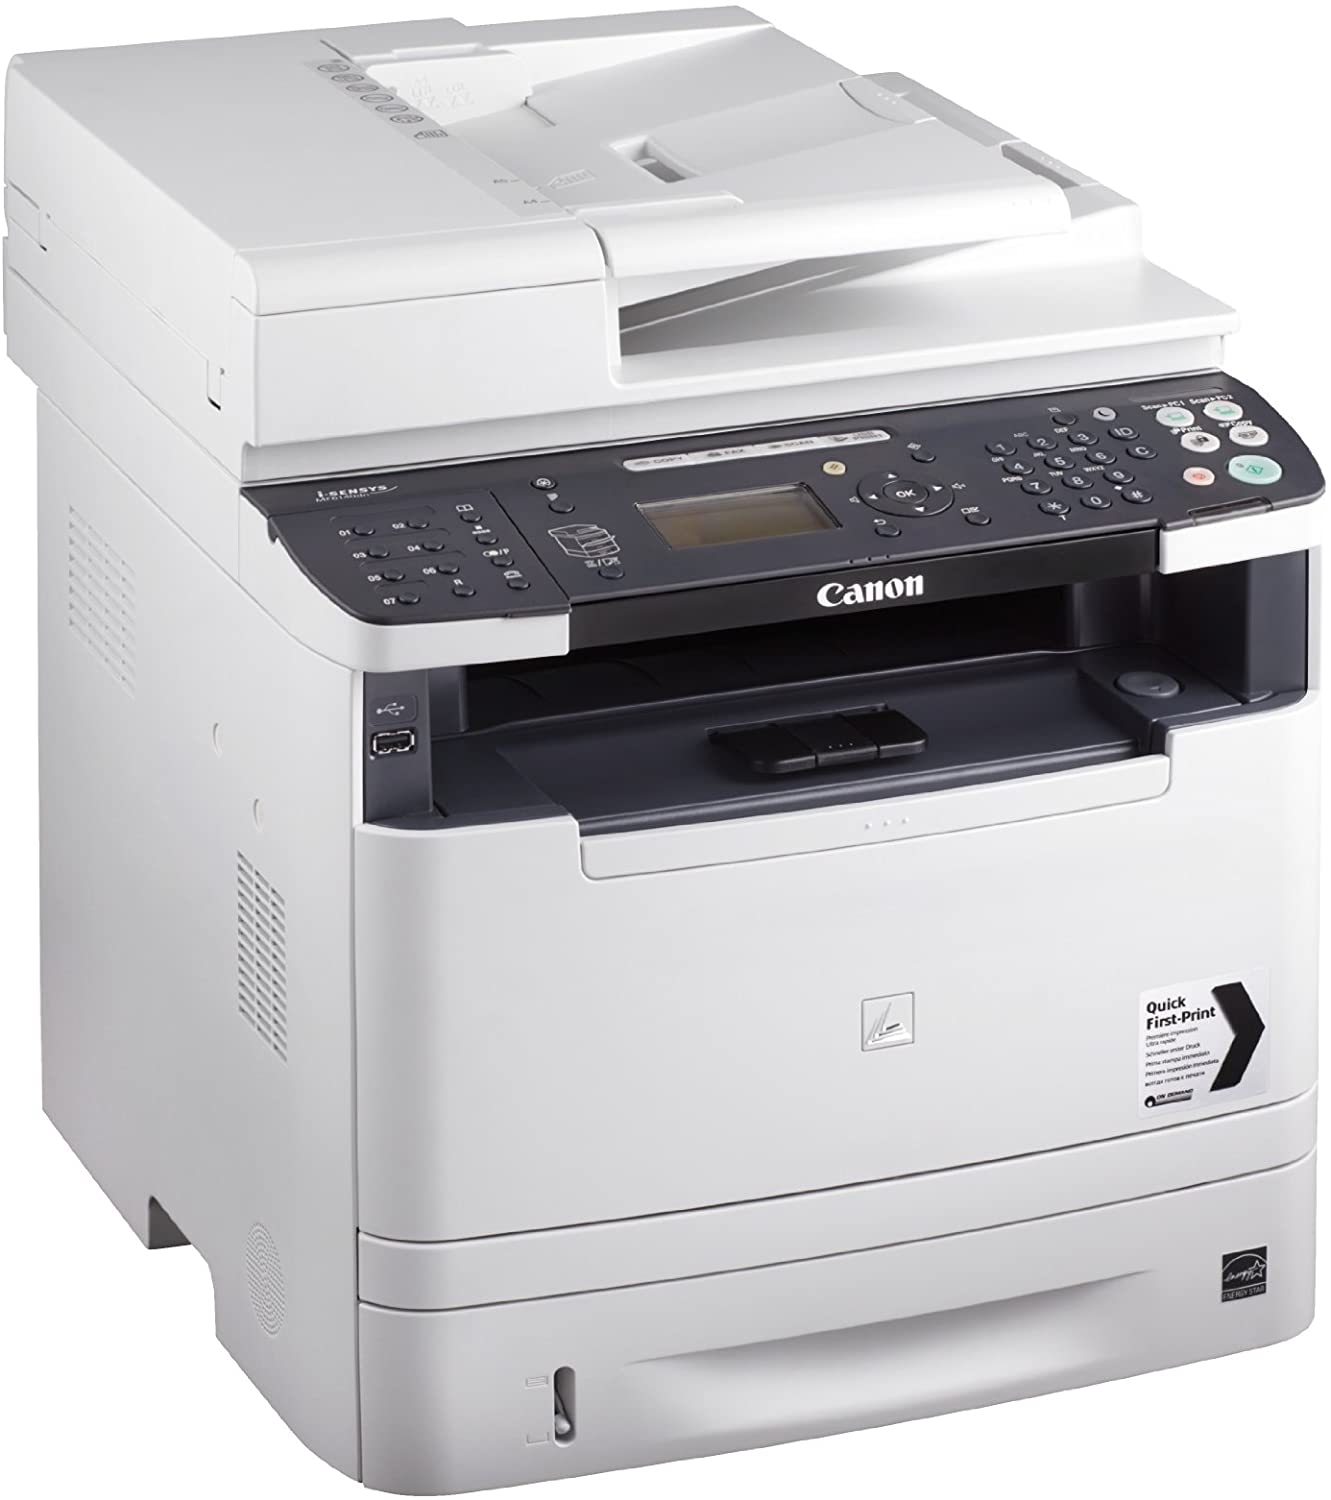 How to Install Canon MF5840dn/MF5880dn Printer - Featured